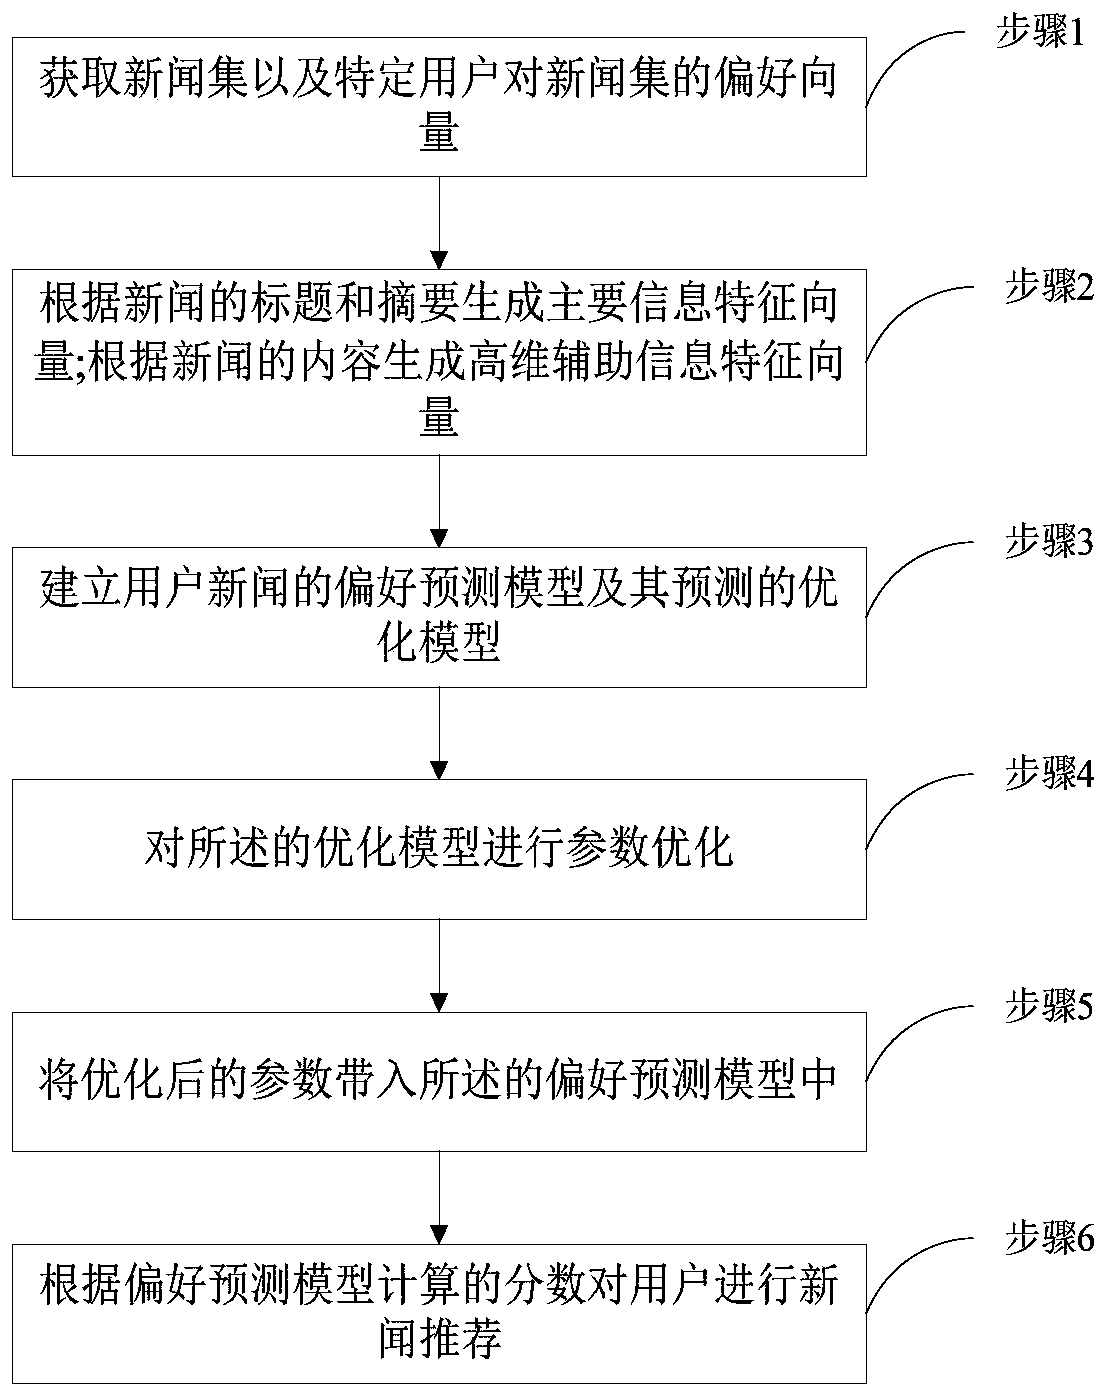 Network media news recommendation method based on high-dimensional auxiliary information